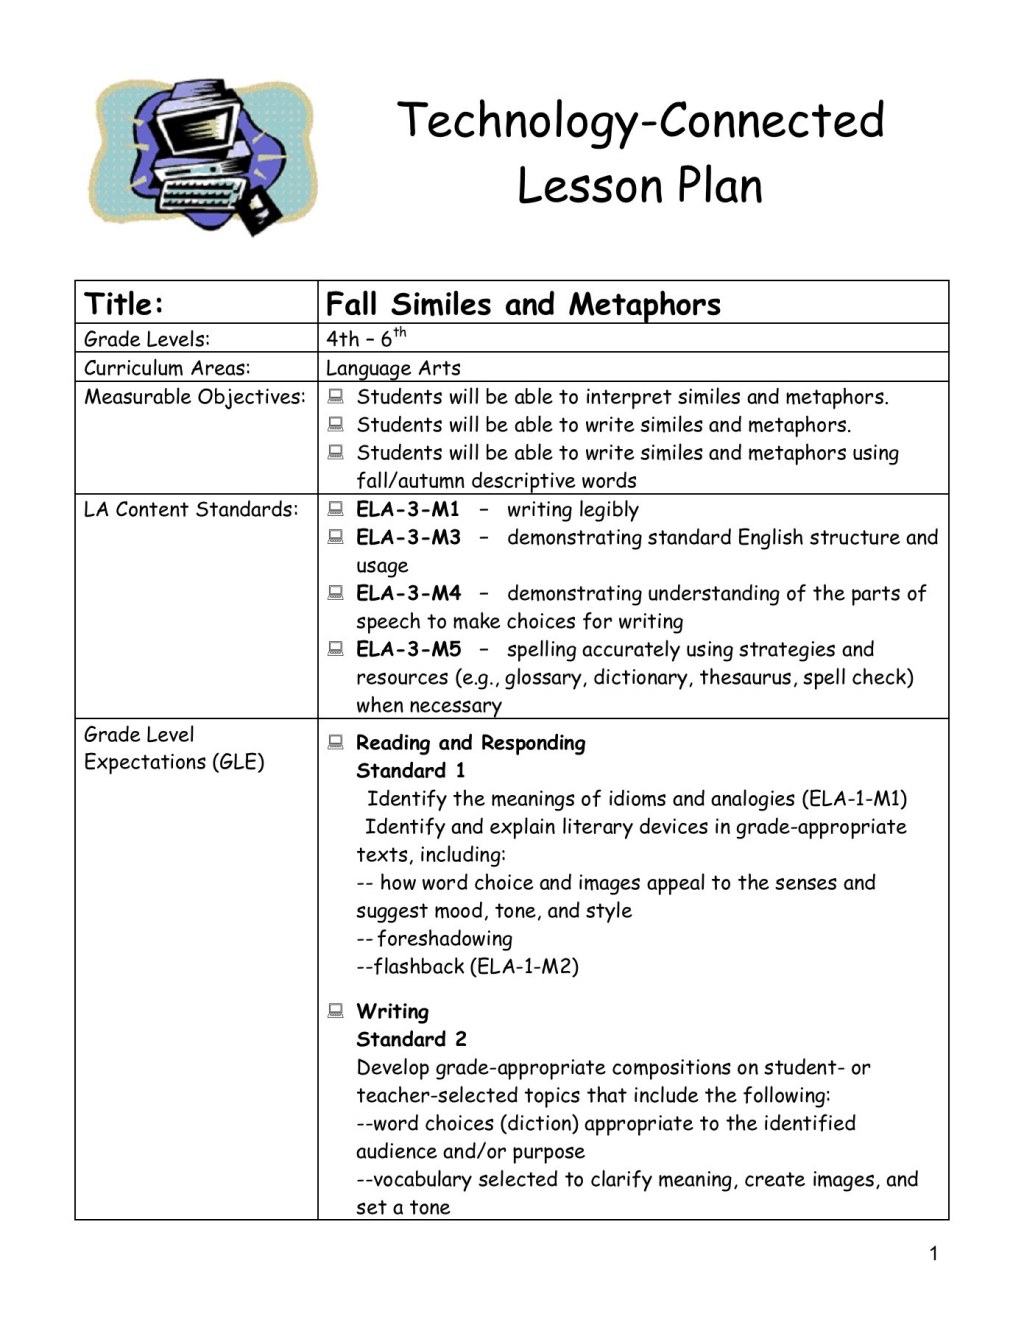 Picture of: Technology-Connected Lesson Plan